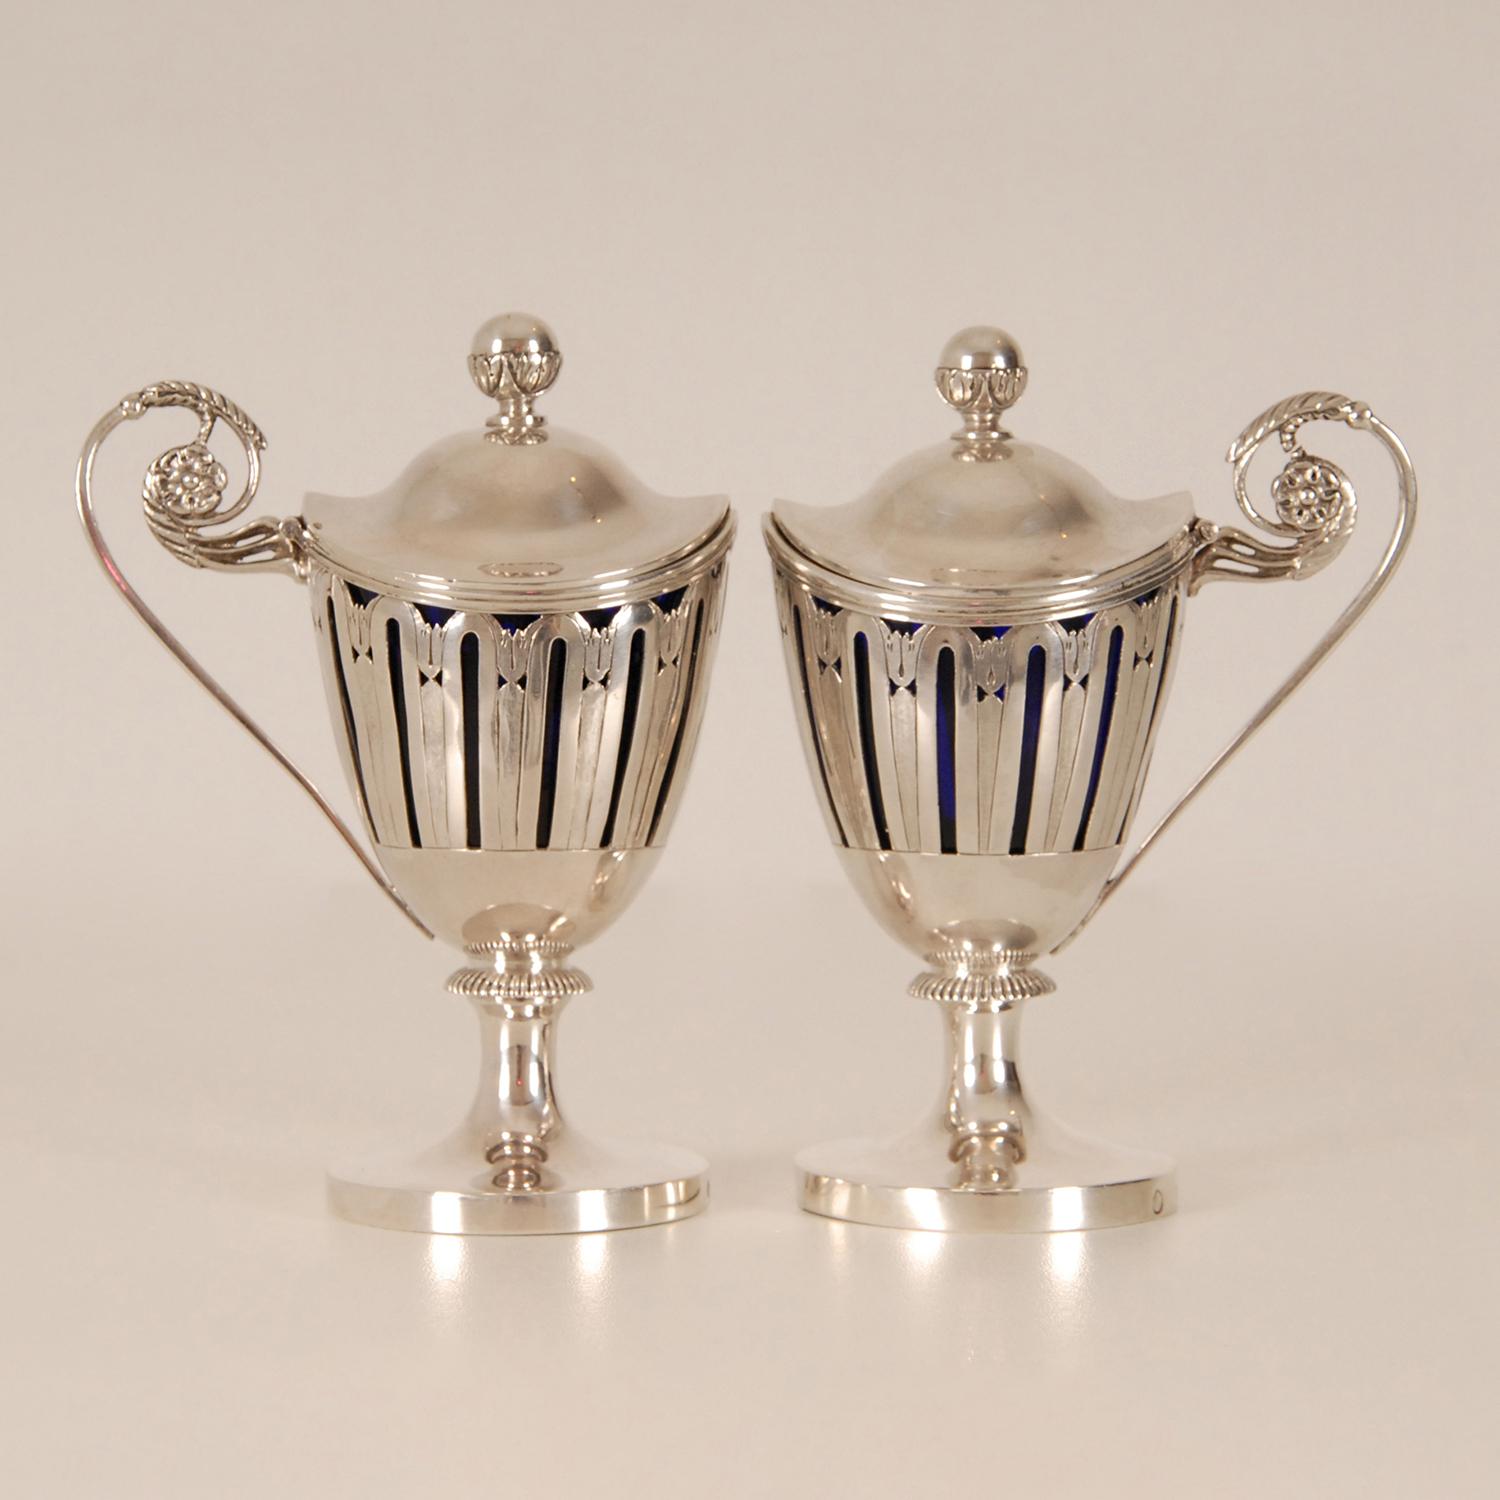 Museal Antique Georgian Sterling Silver Mustard pots
Style: Empire, Georgian, Antique, Regency, Napoleonic
Material sterling Silver with cobalt blue glass liners
Fully hand made openwork body with husk pattern.
The silver is not cast but completely